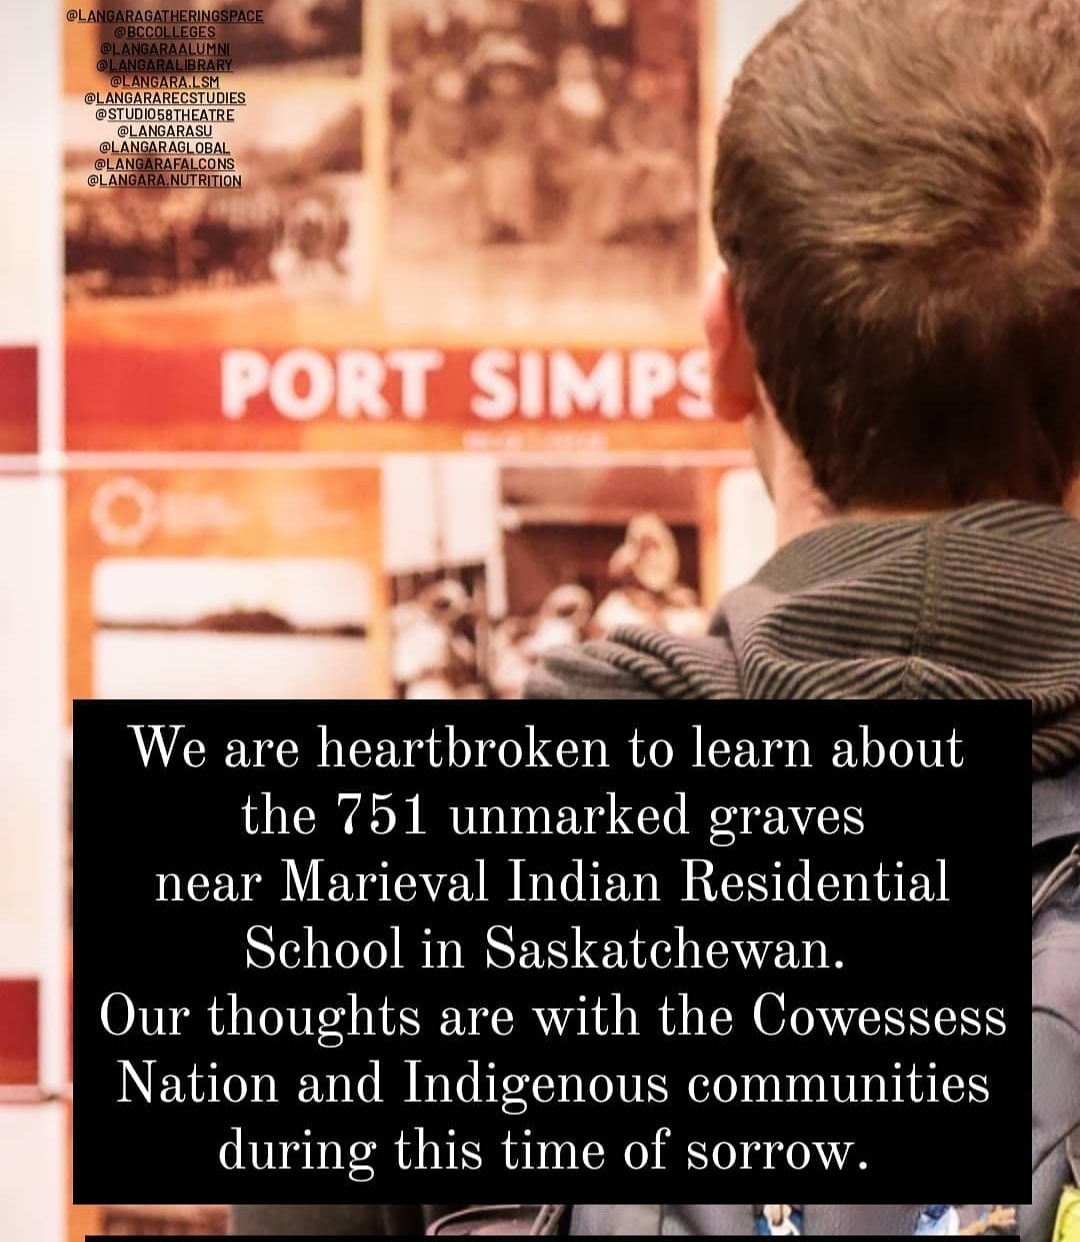 Marieval Indian Residential School Tragic State of Affairs